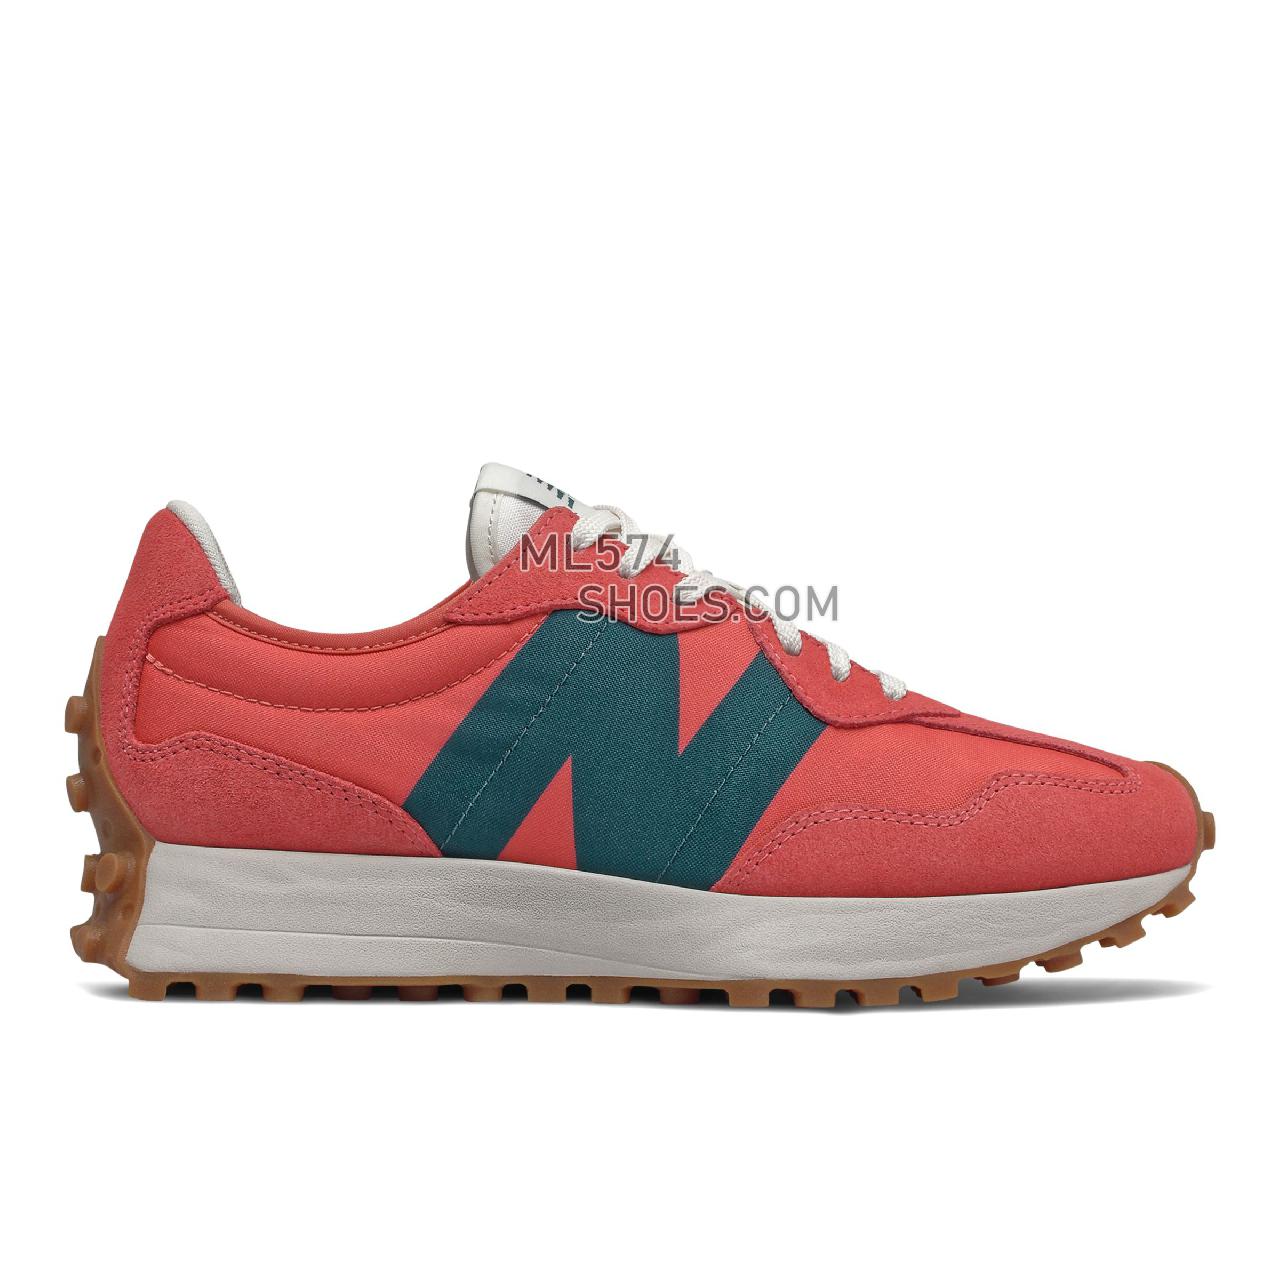 New Balance 327 - Women's Classic Sneakers - Mars Red with Mountain Teal - WS327HL1